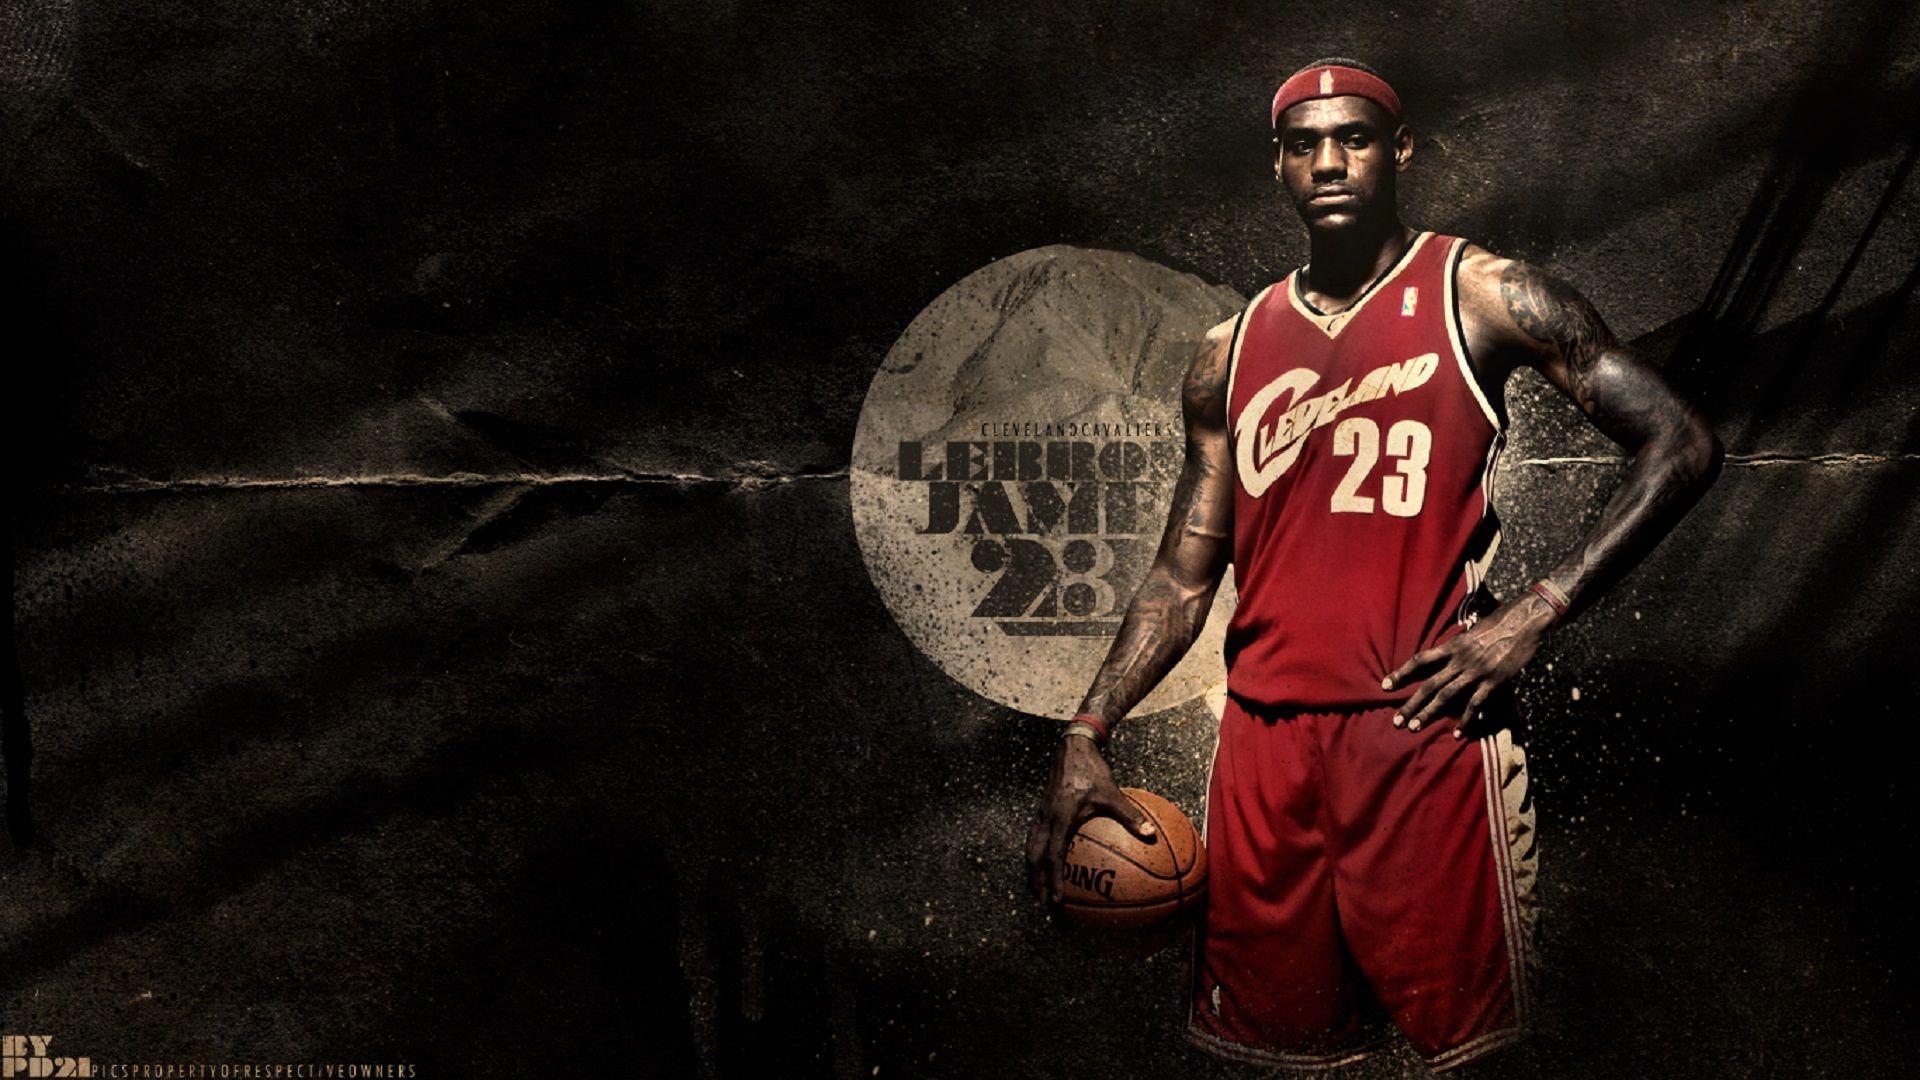 48+ LeBron James wallpapers HD free Download